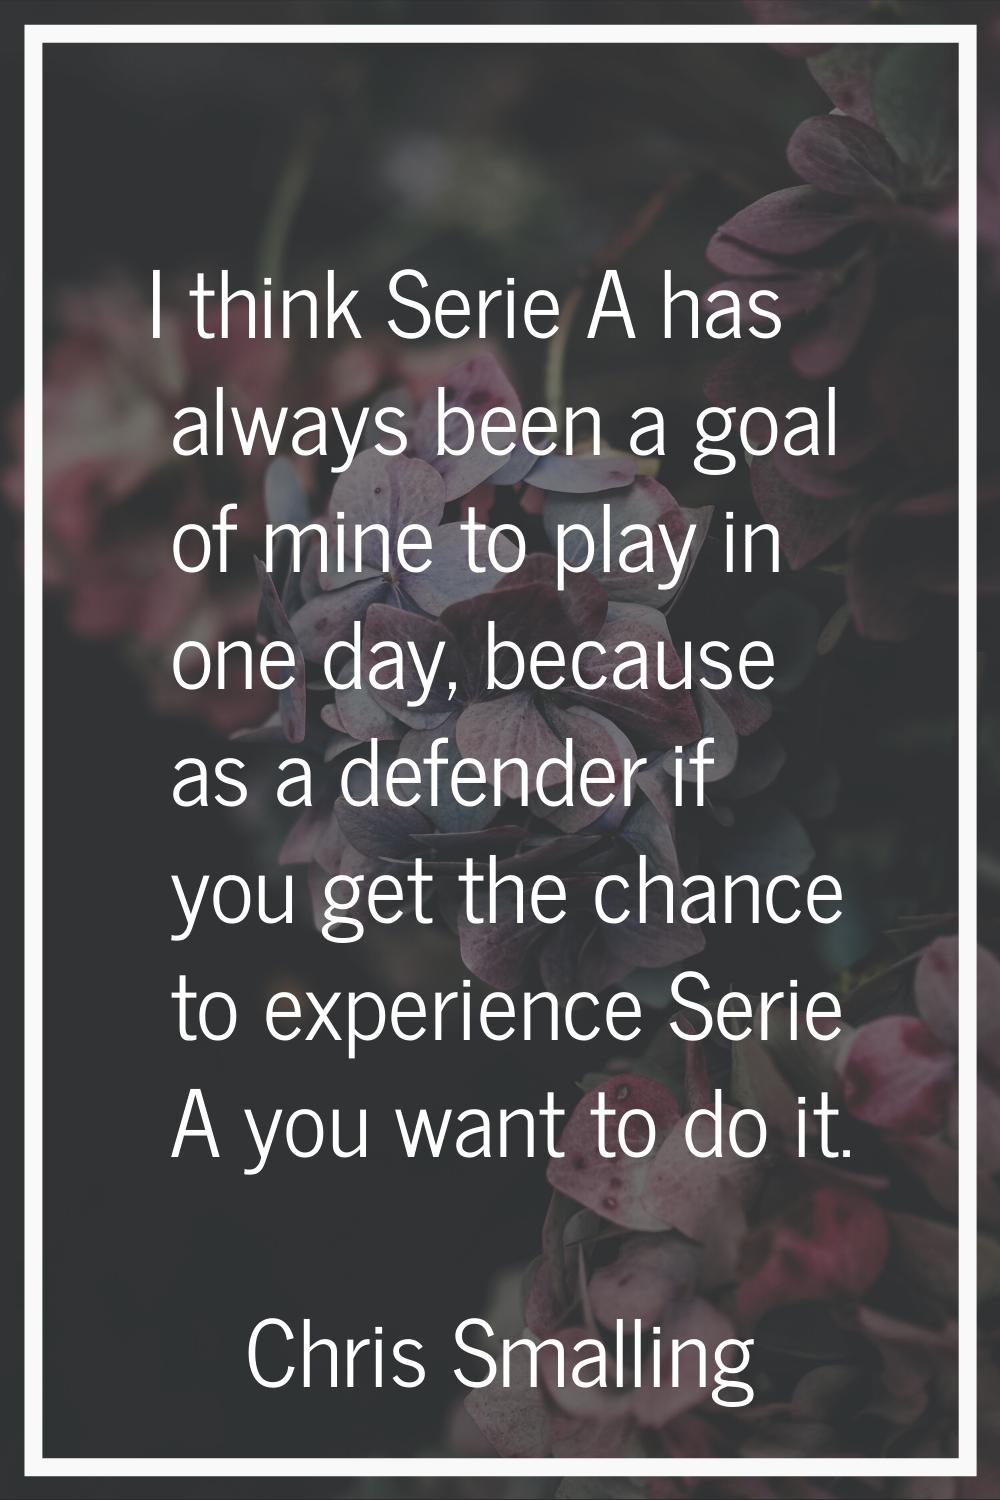 I think Serie A has always been a goal of mine to play in one day, because as a defender if you get